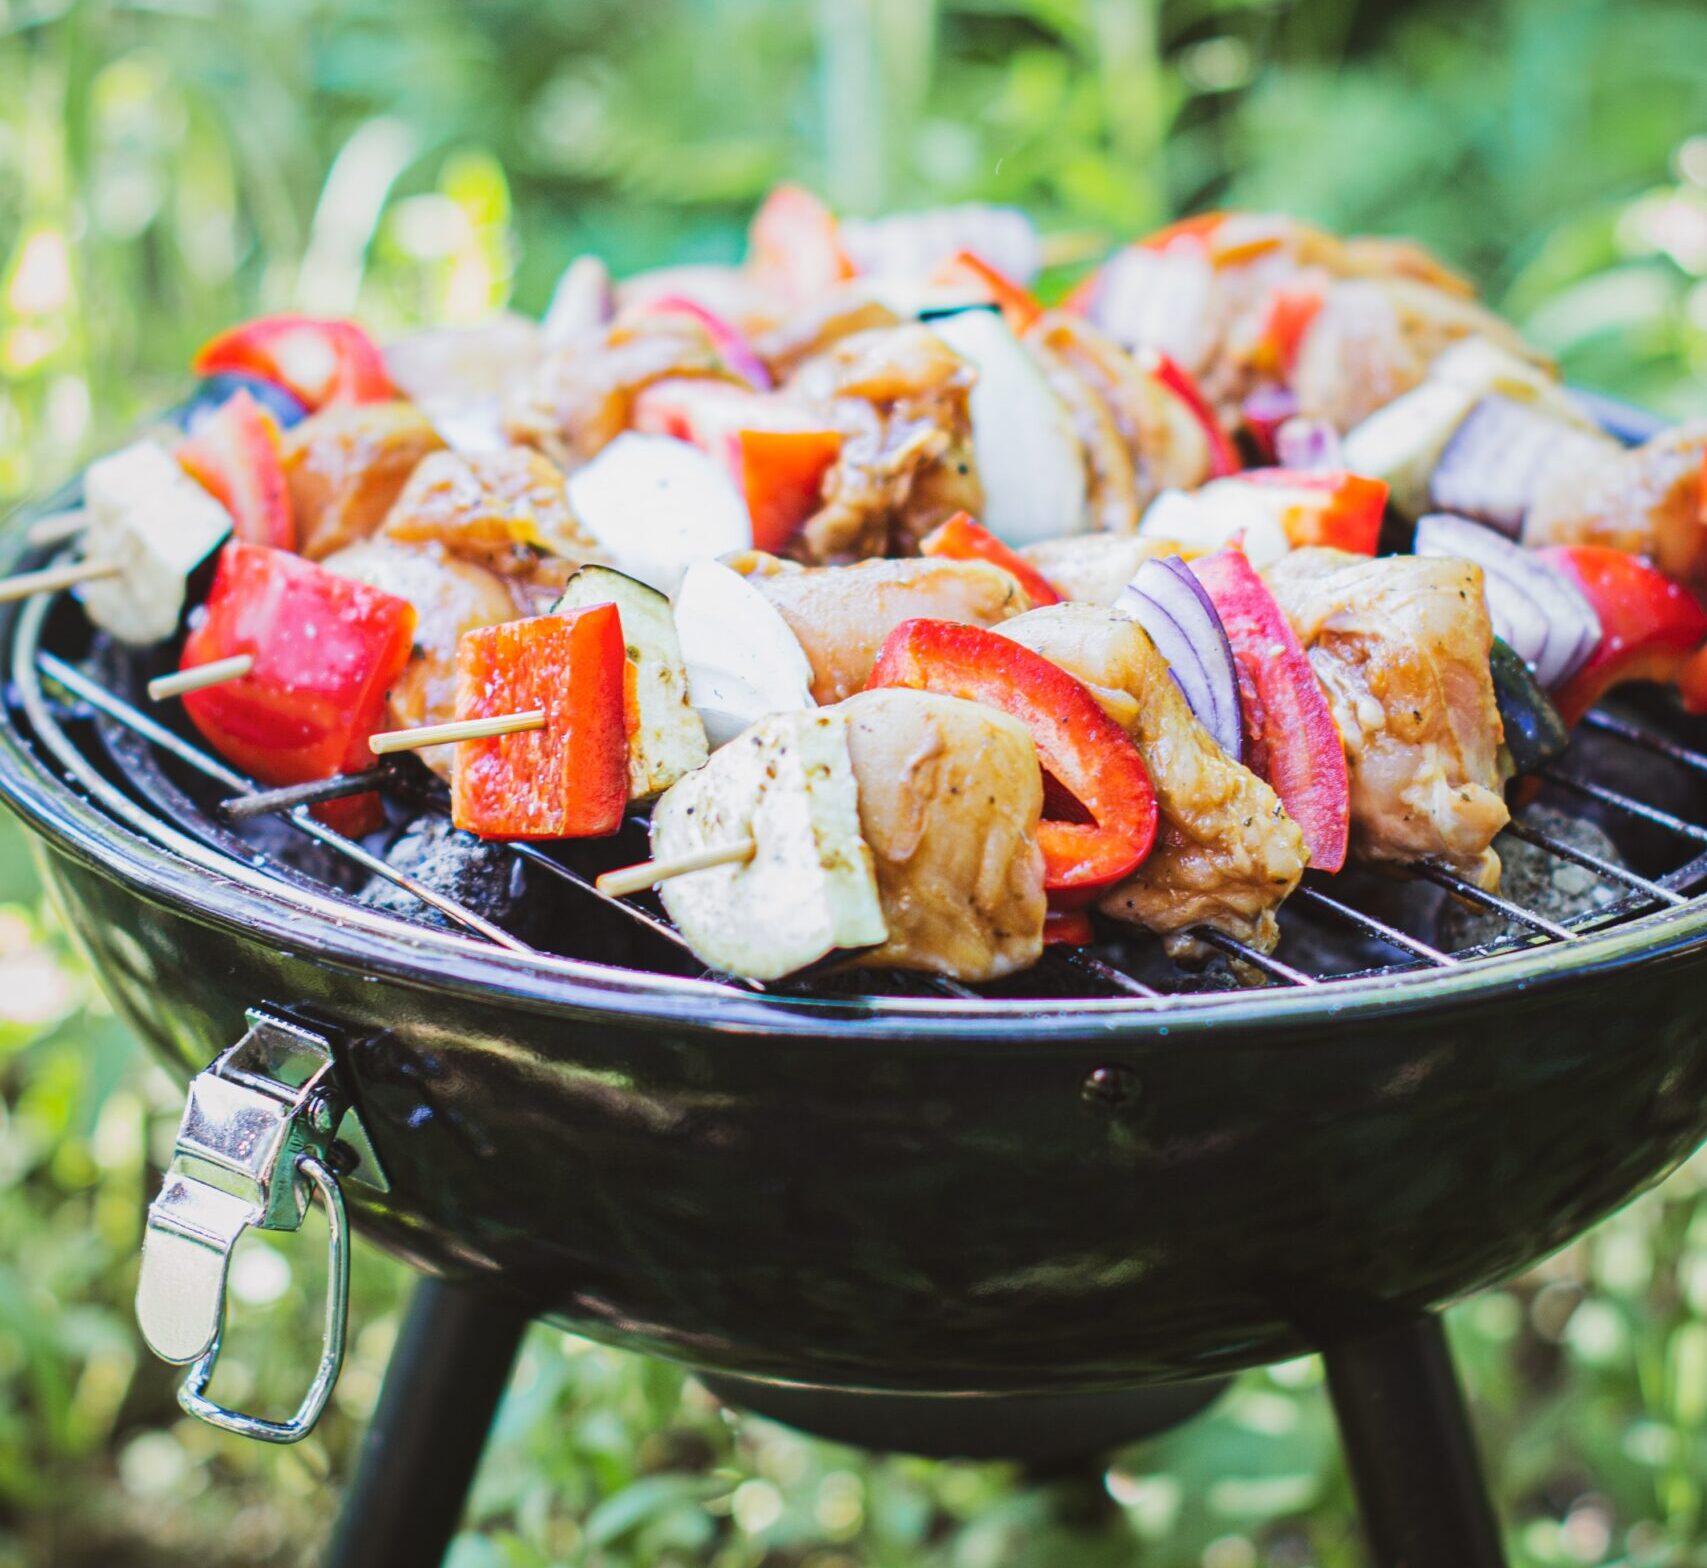 Prevent Wooden Skewers From Burning on Grill With This Trick ...